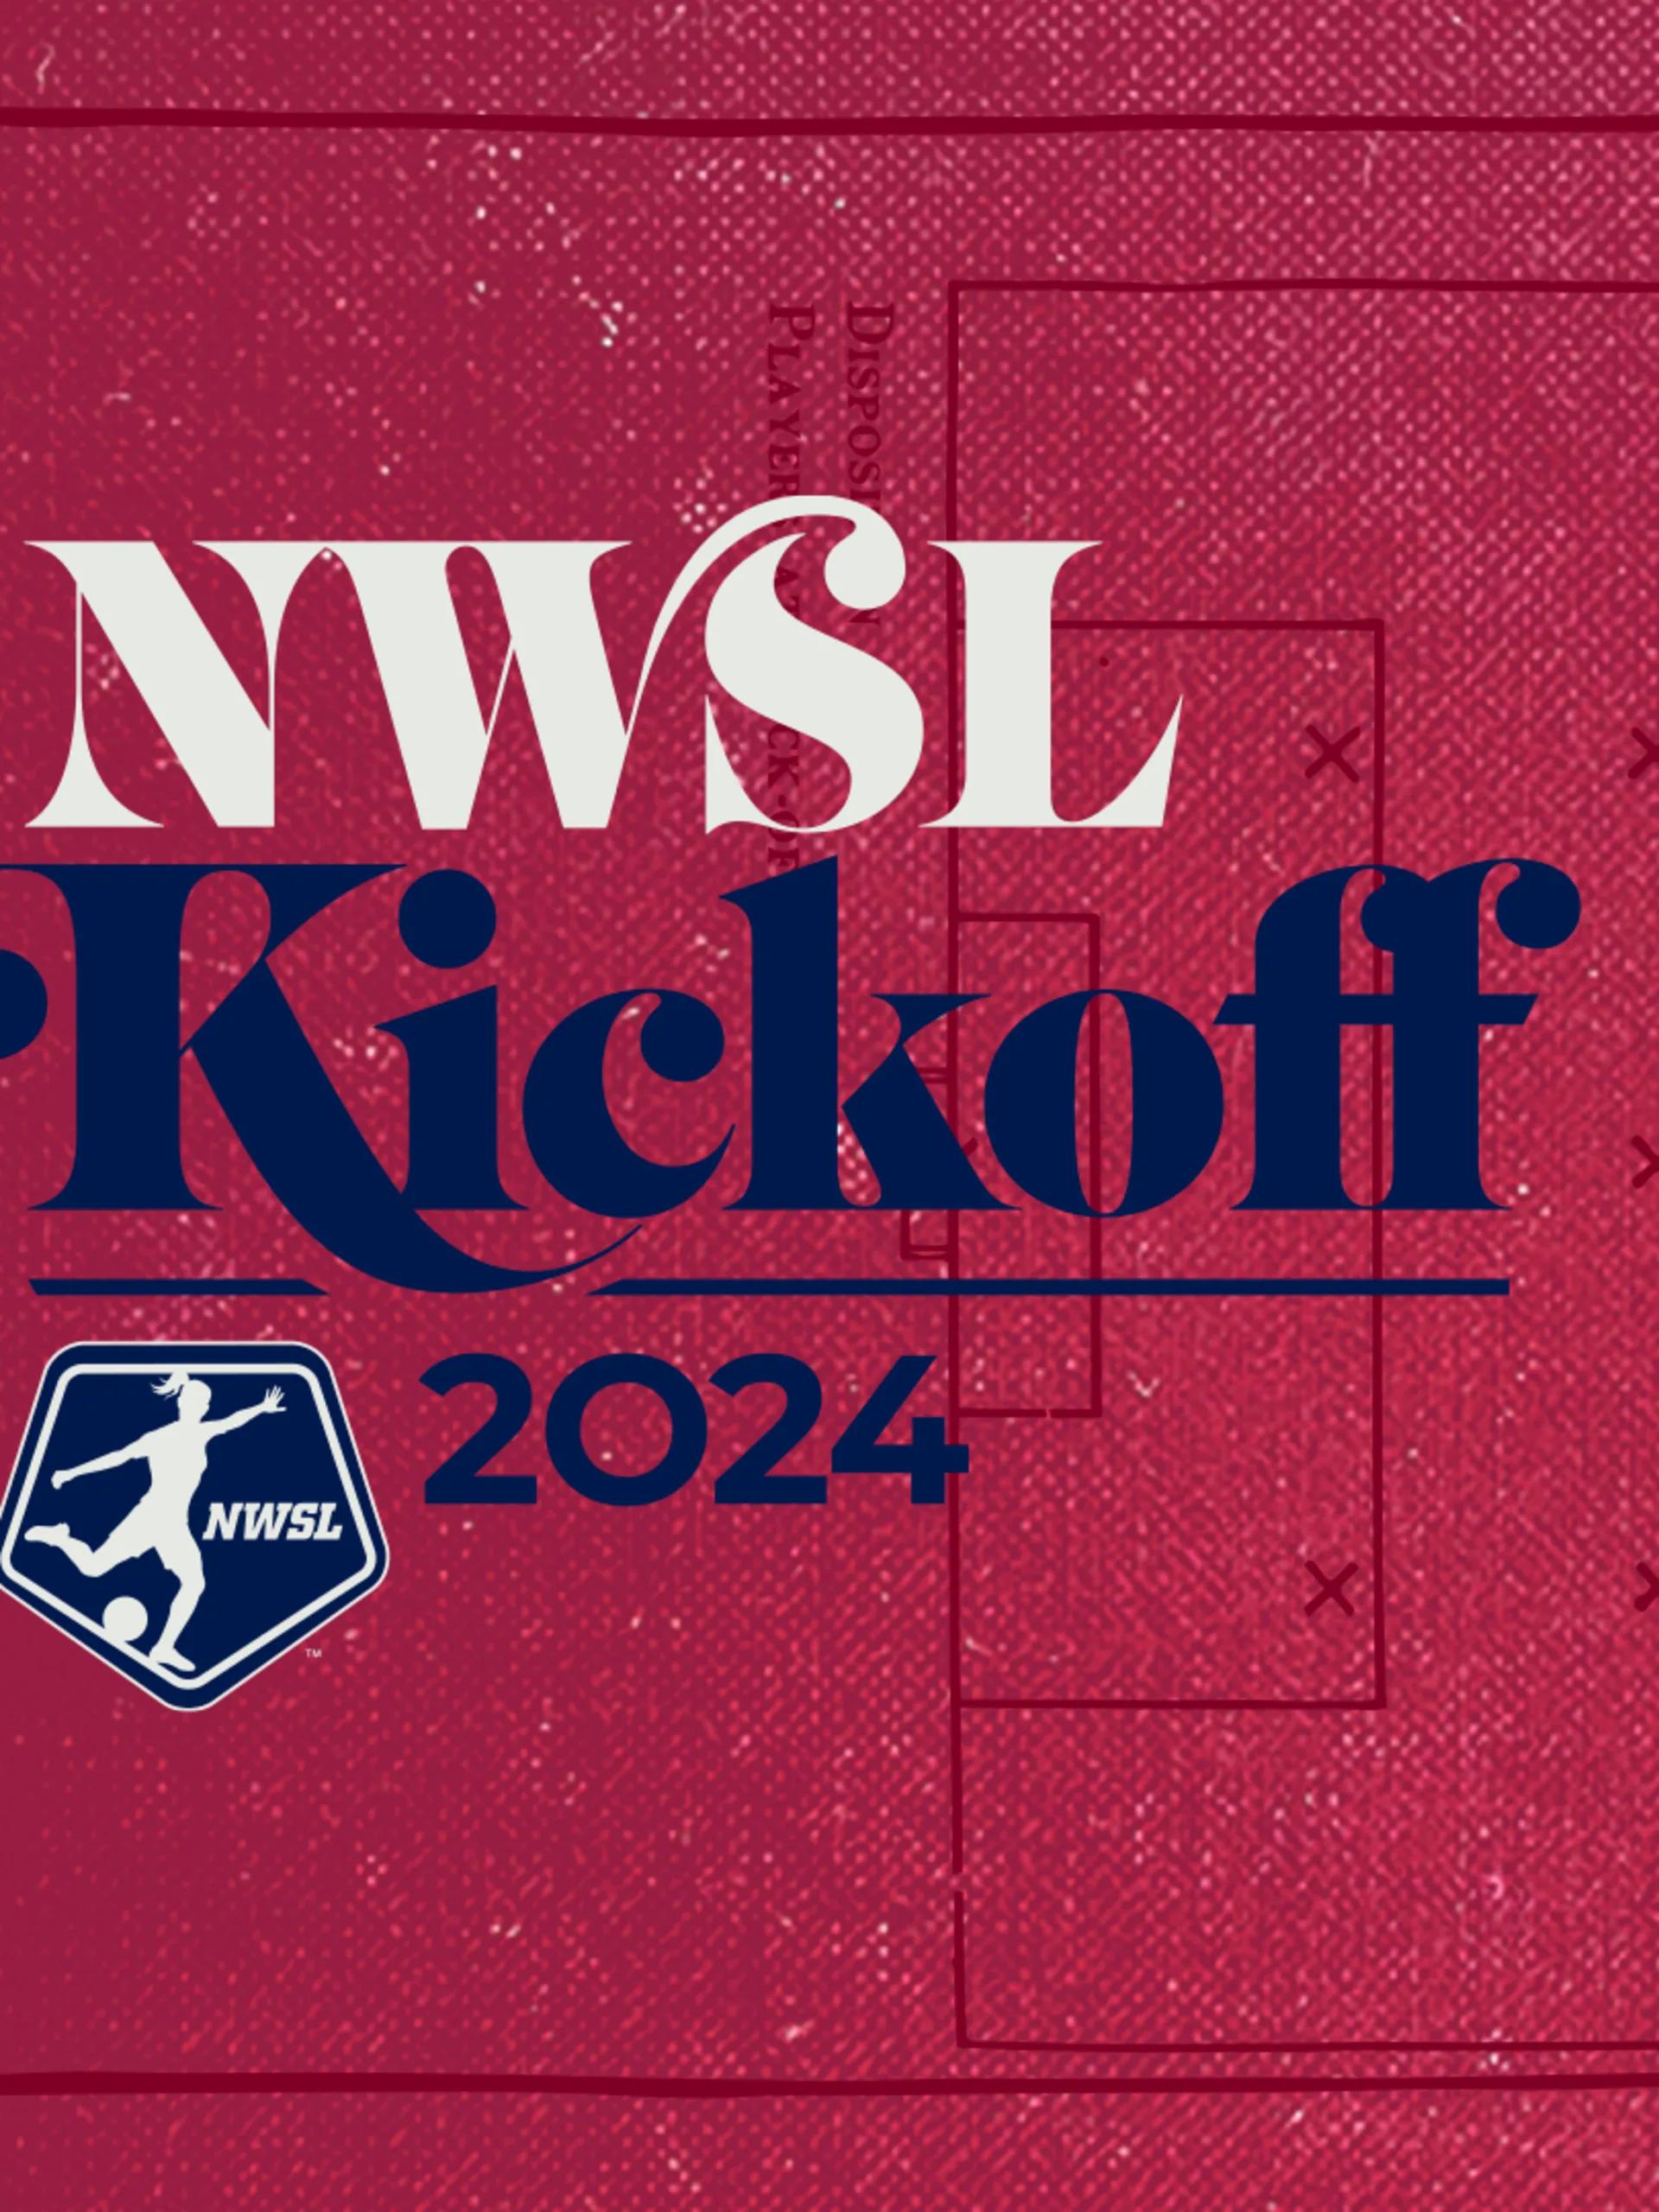 kickoff-announcement-red-book-1920x1080